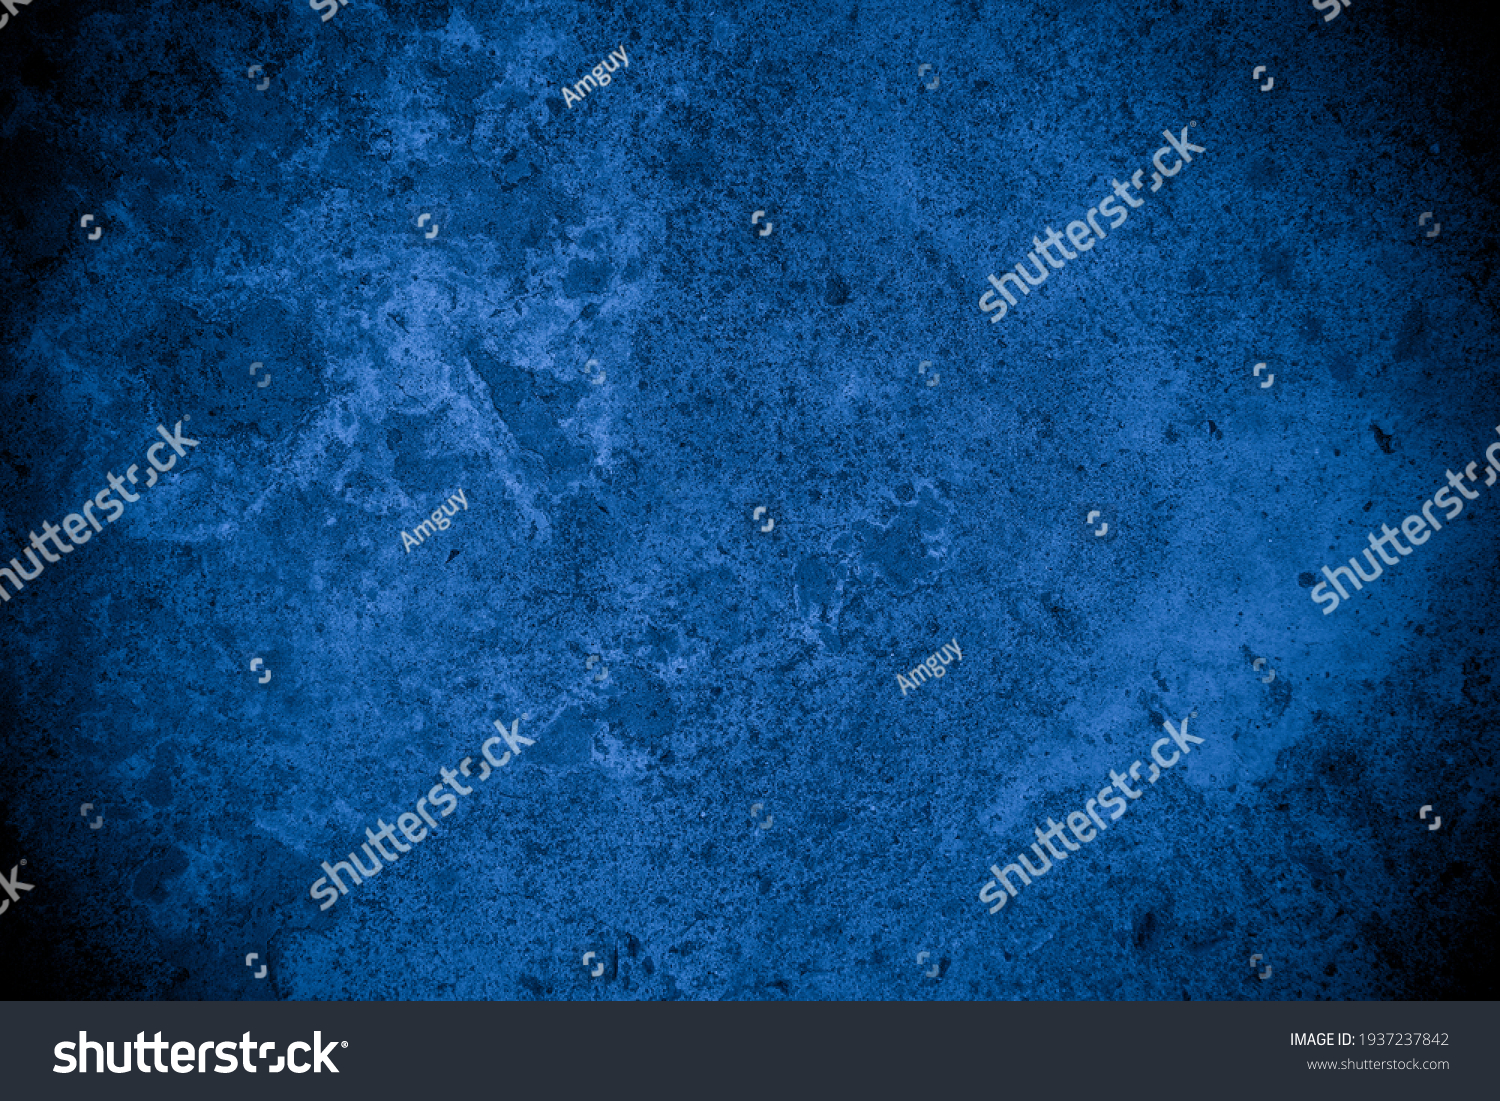 Old wall pattern texture cement blue dark abstract  blue color design are light with black gradient background. #1937237842